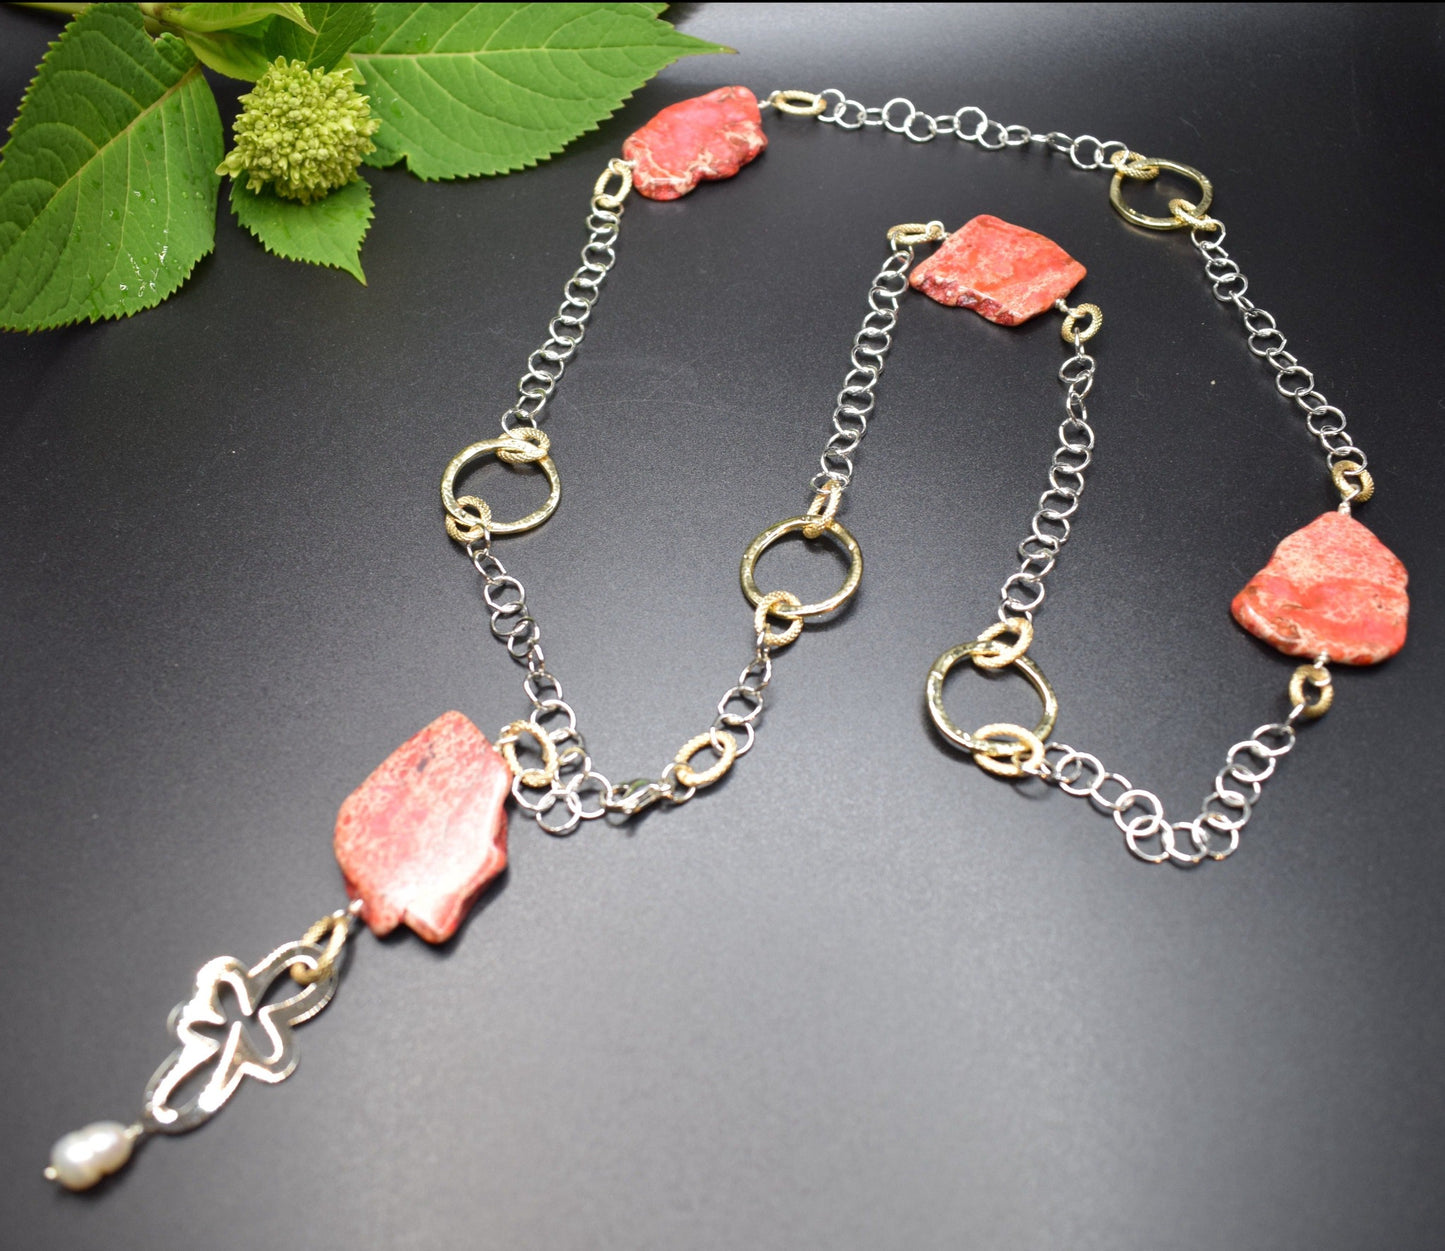 Necklace Happy red with imperial jasper stone handmade chain and gold details with flower